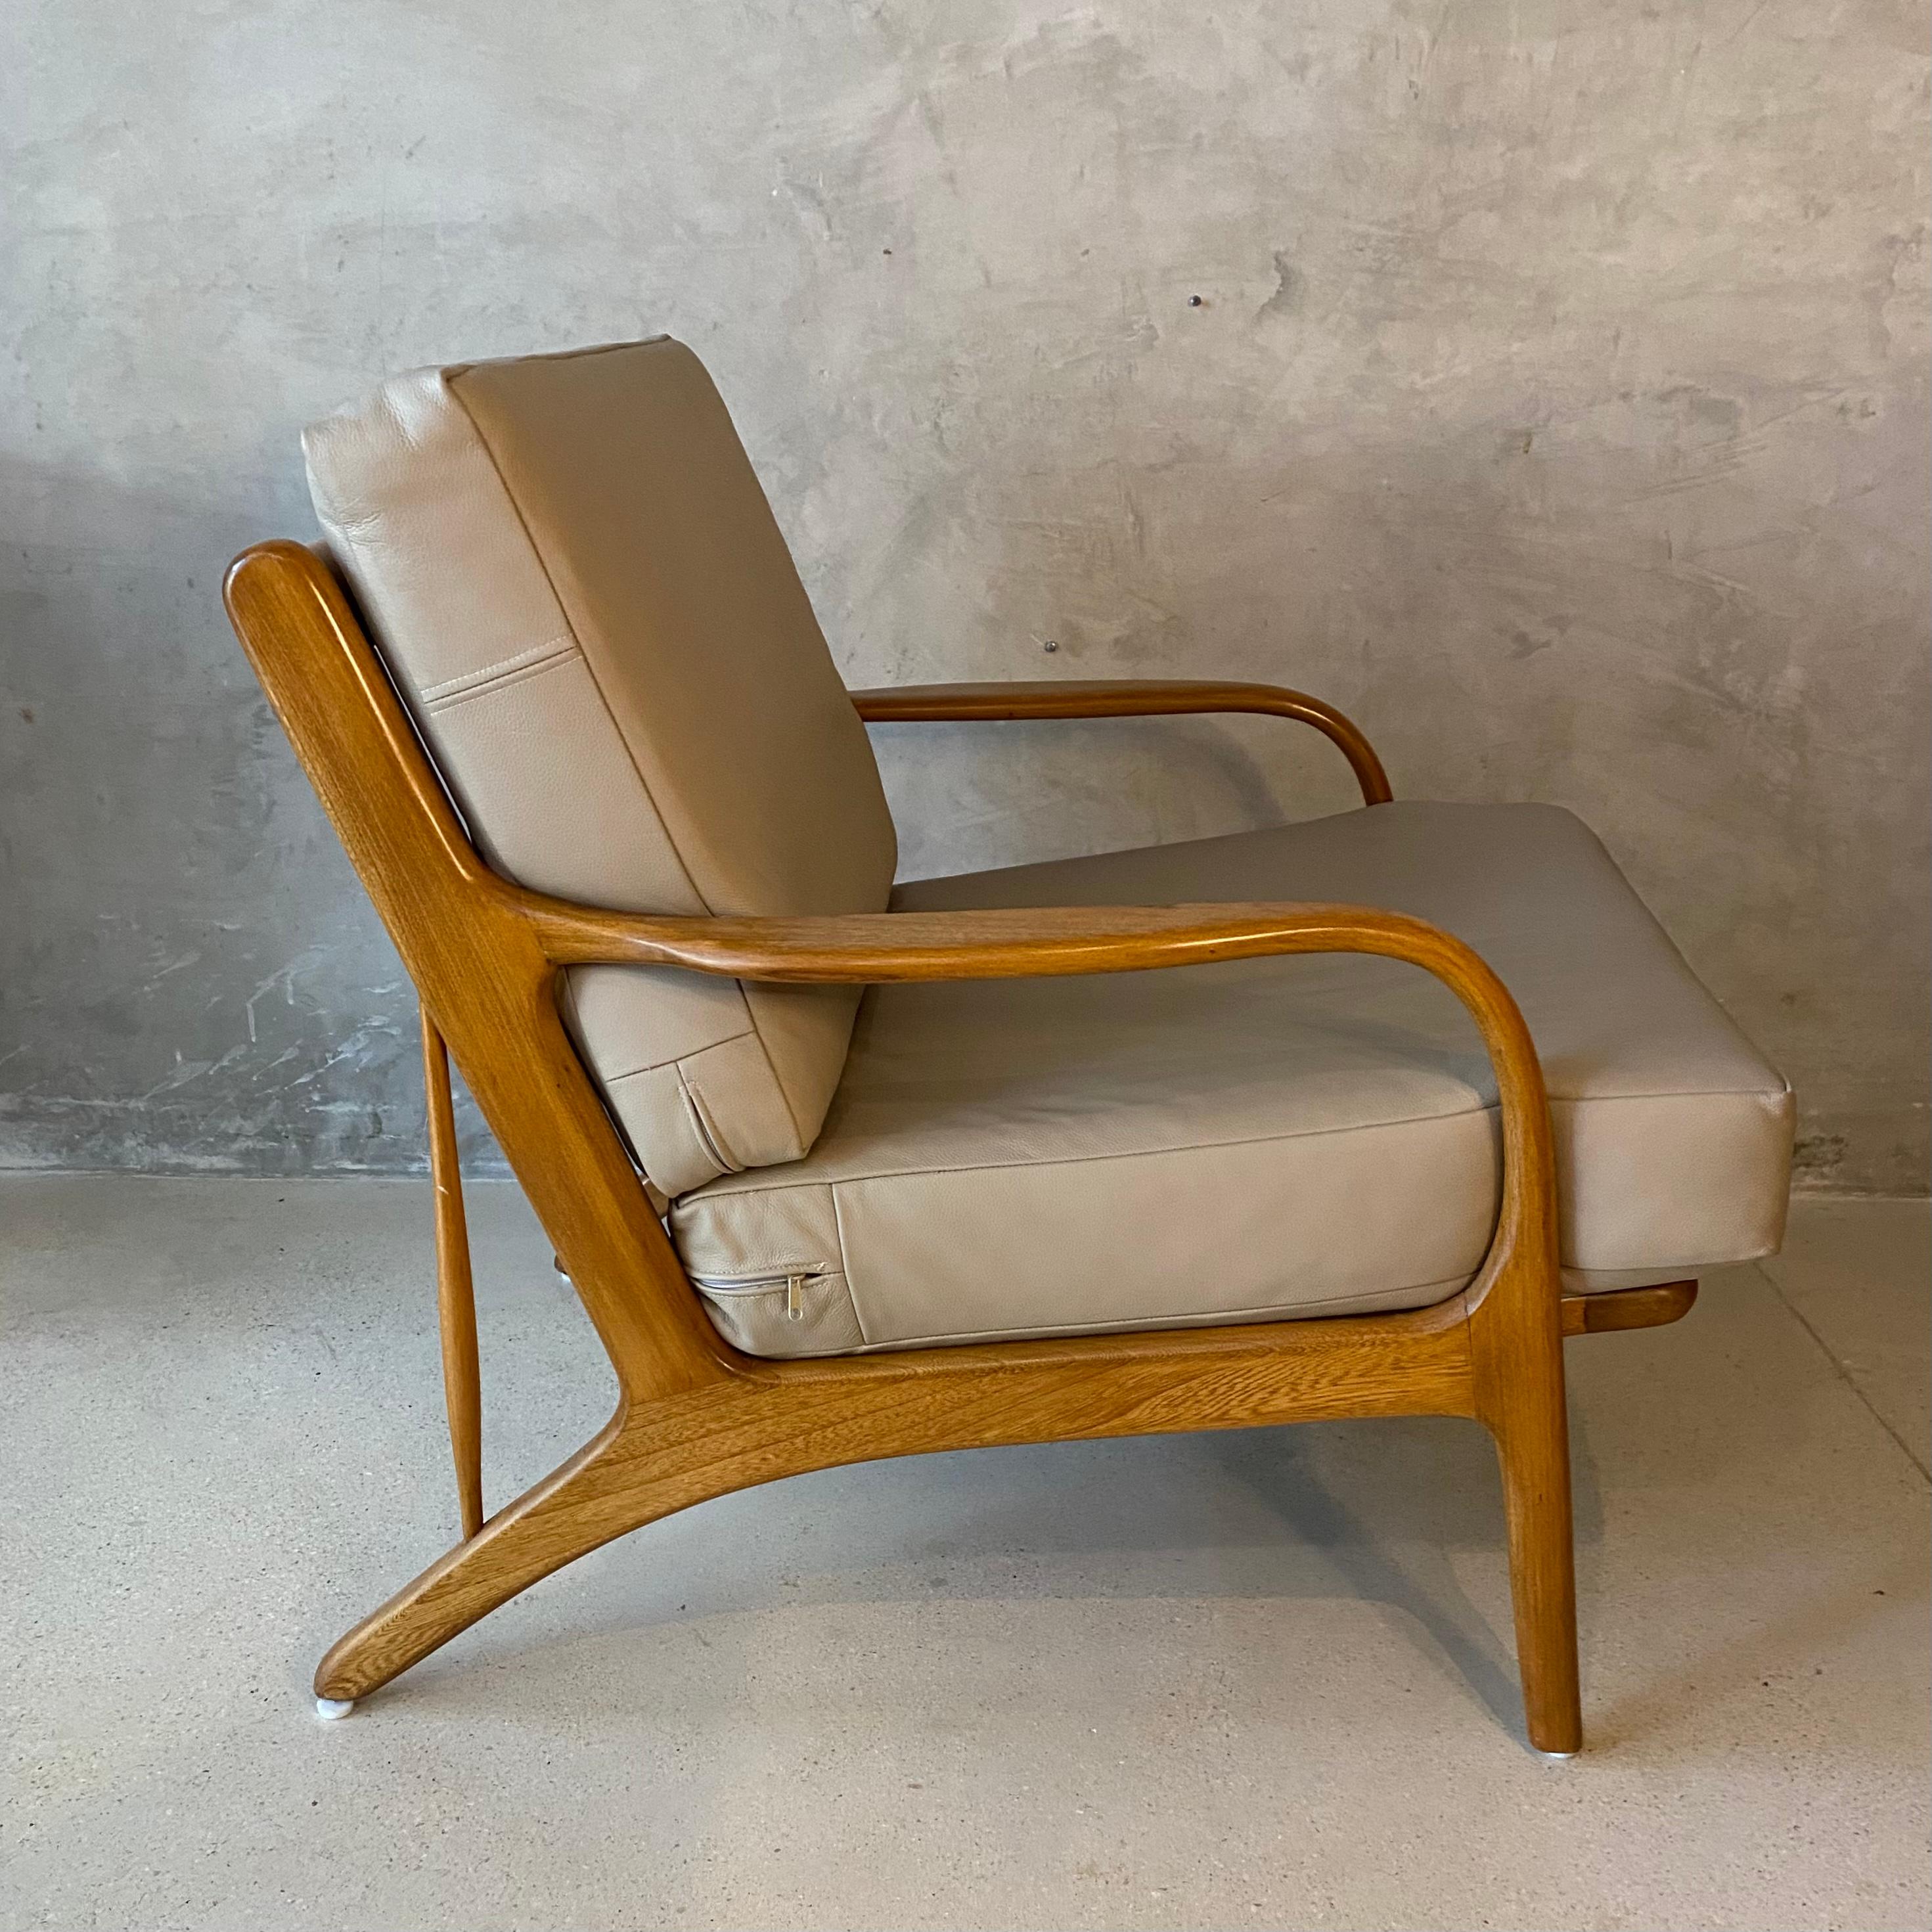 Mexican Midcentury Lounge Chair, “Malinche“, 1950s For Sale 2